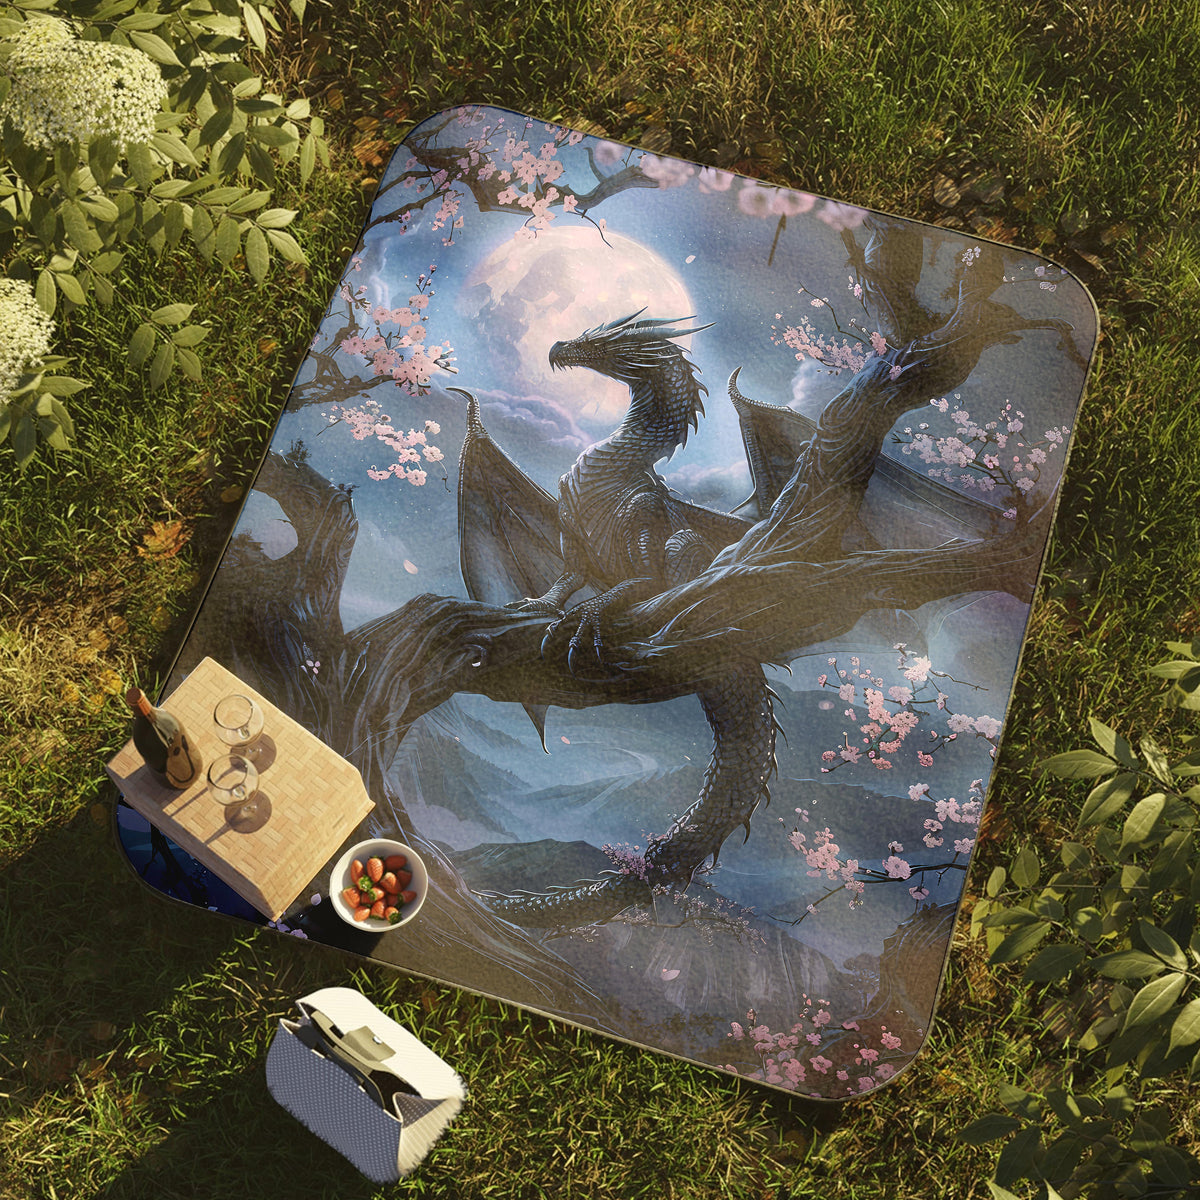 a picnic blanket with a dragon painting on it